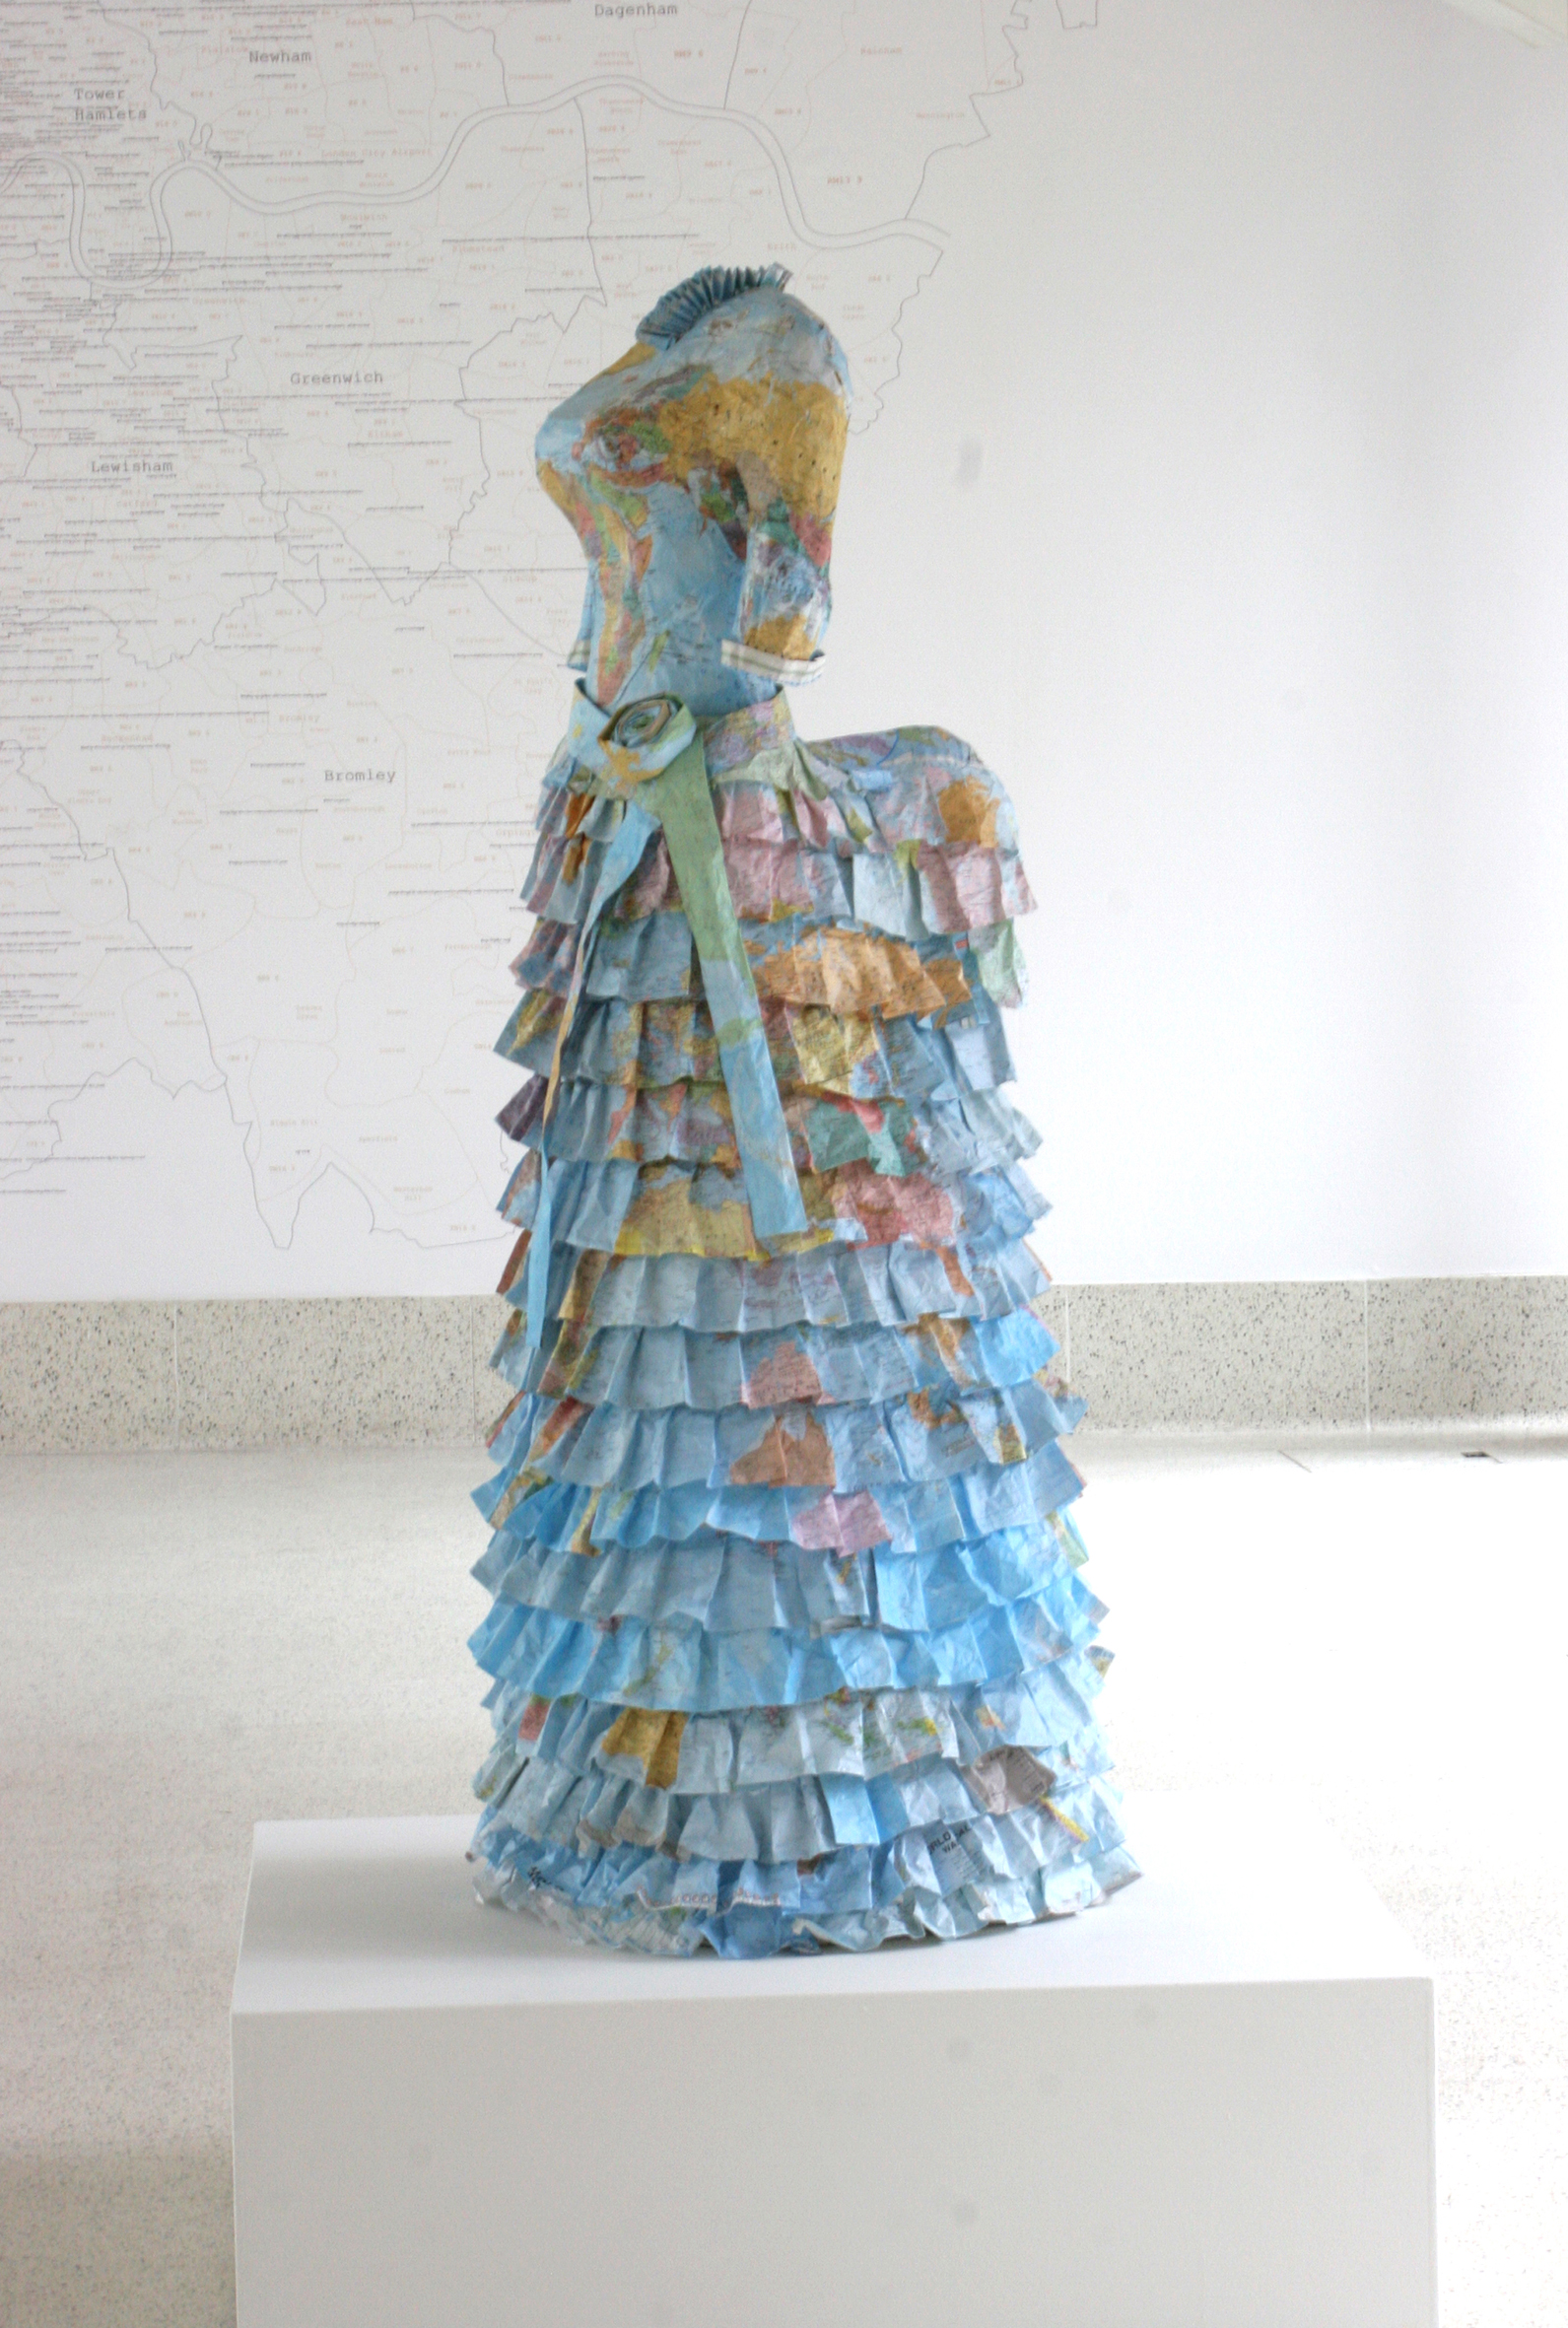 Colonial Dress made from paper maps. Lifesize Â© Susan Stockwell. Photo by Colin Hampden-White, 2011